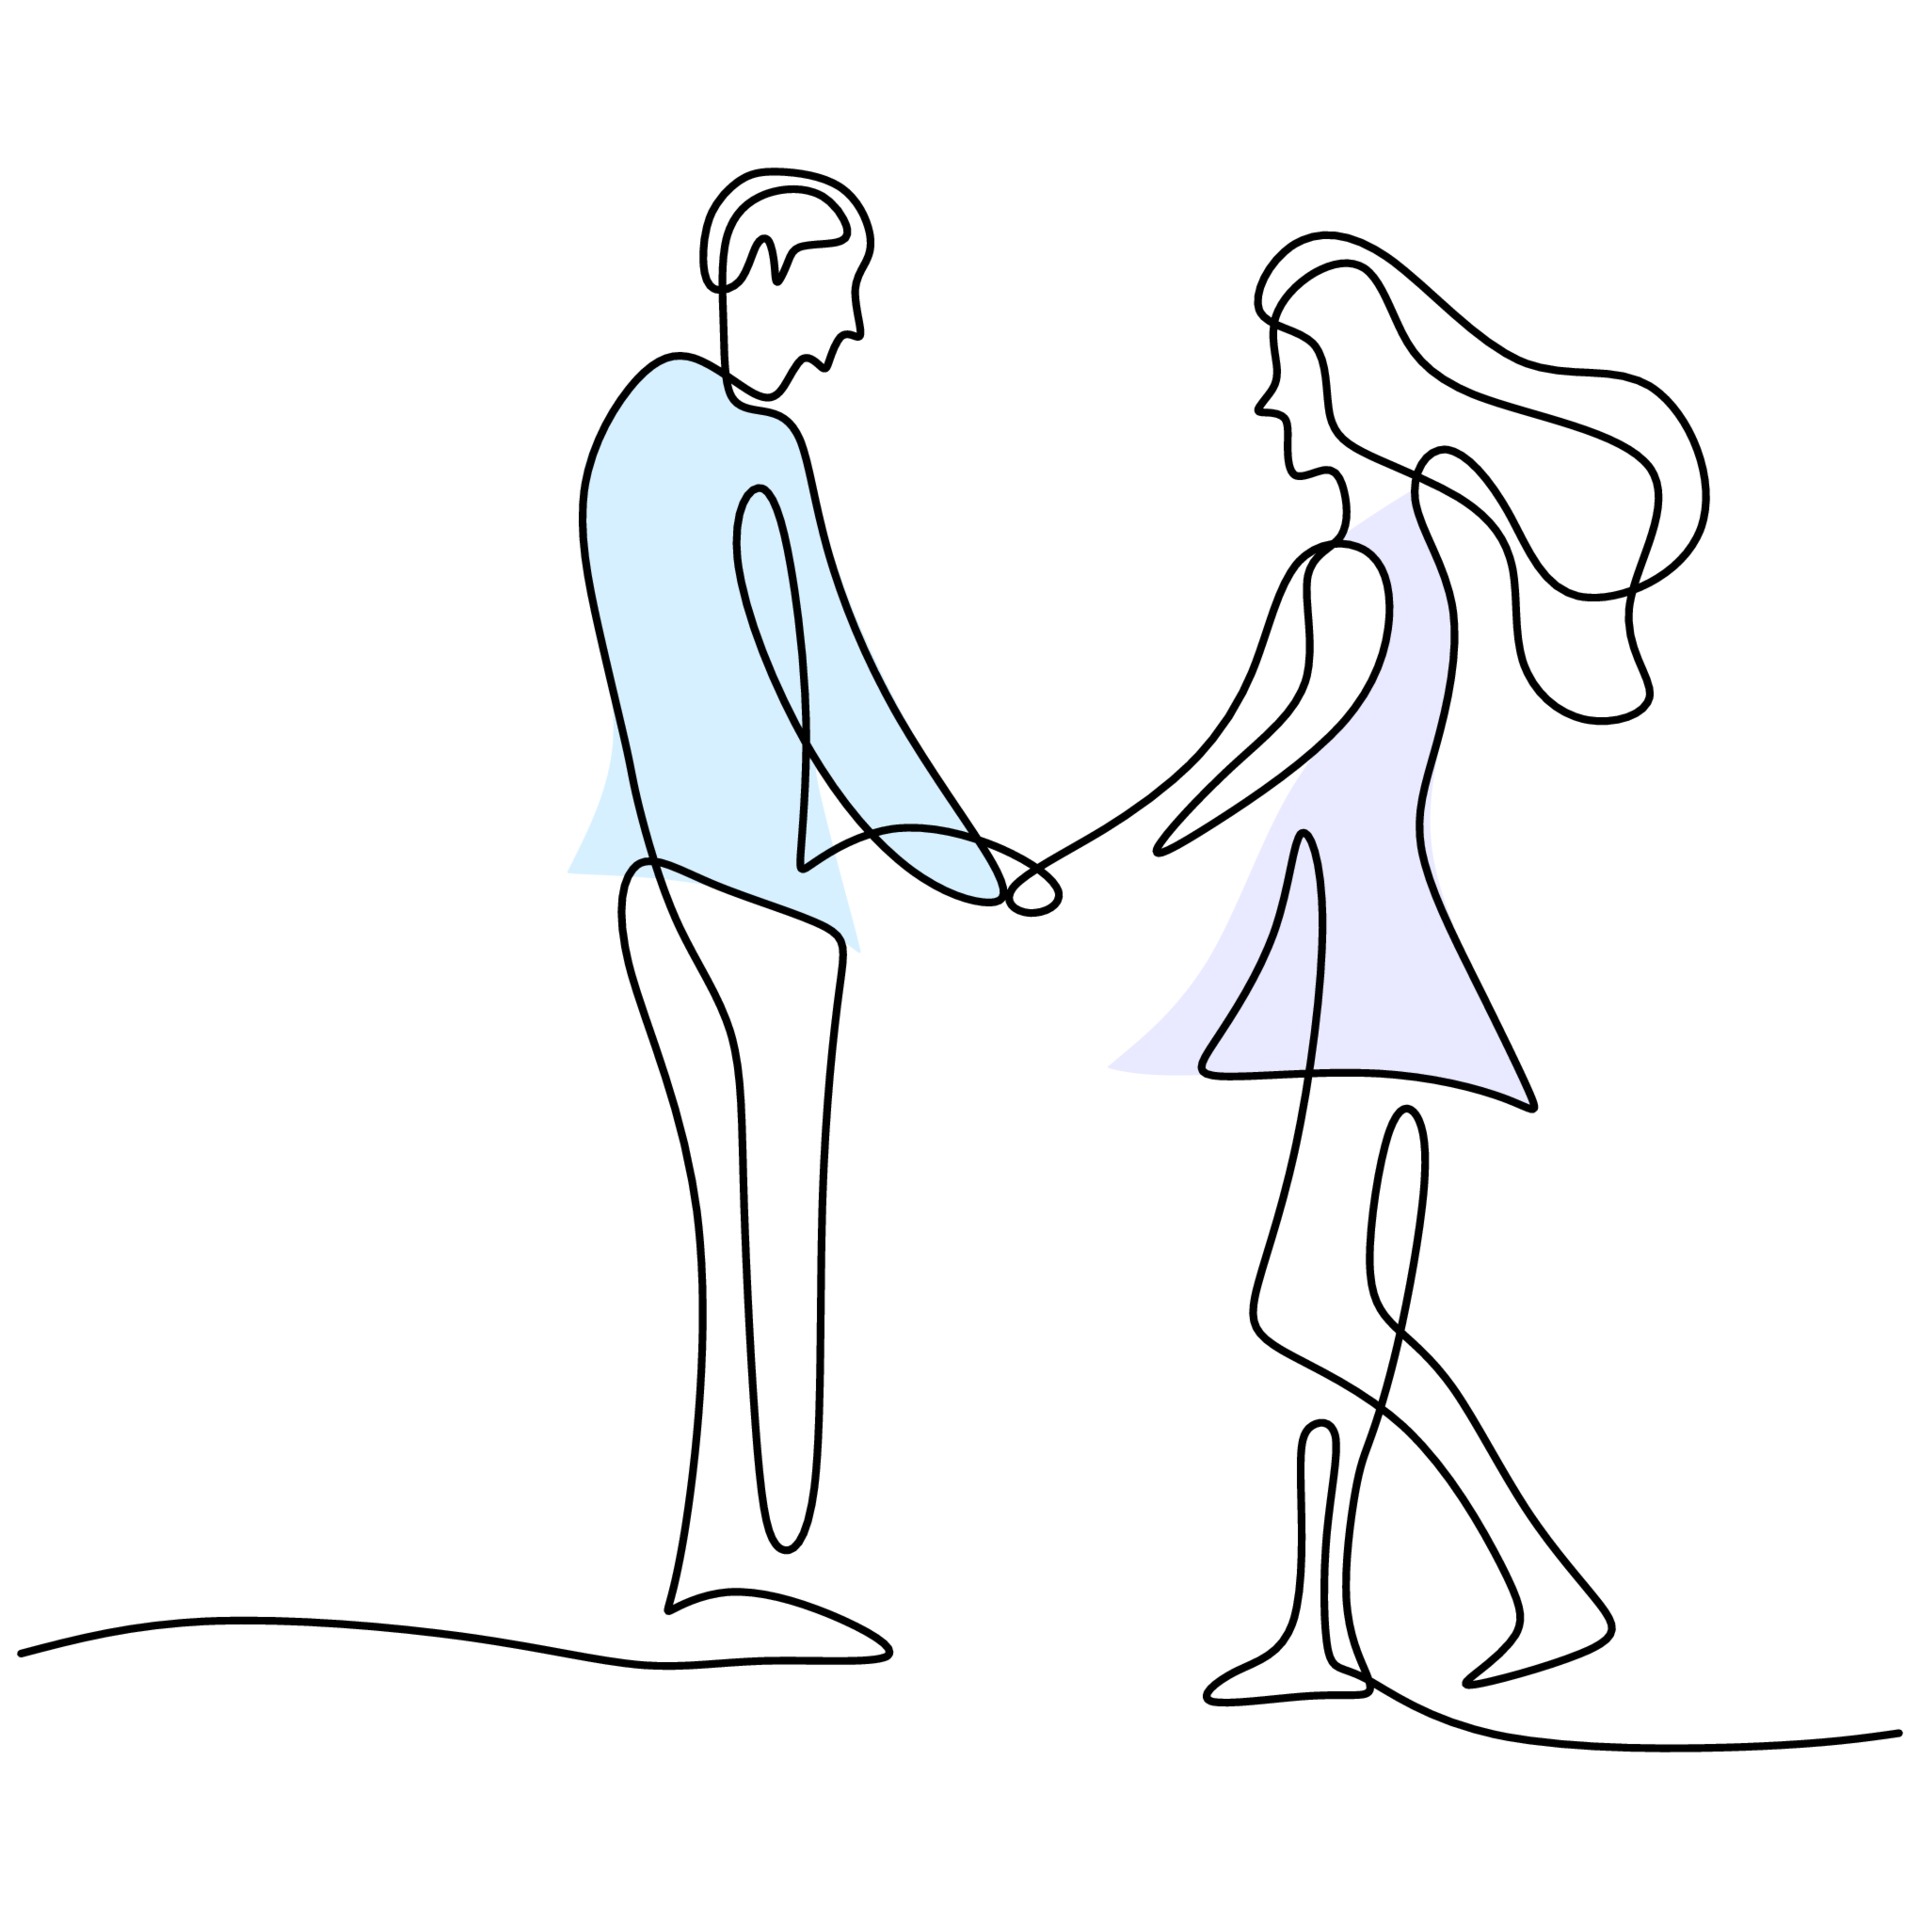 Continuous One Line Drawing Of Happy Young Couple Standing And Holding Hands Together Loving Couple Woman And Man In Romantic Pose Isolated On White Background Vector Minimalism Design Illustration Vector Art